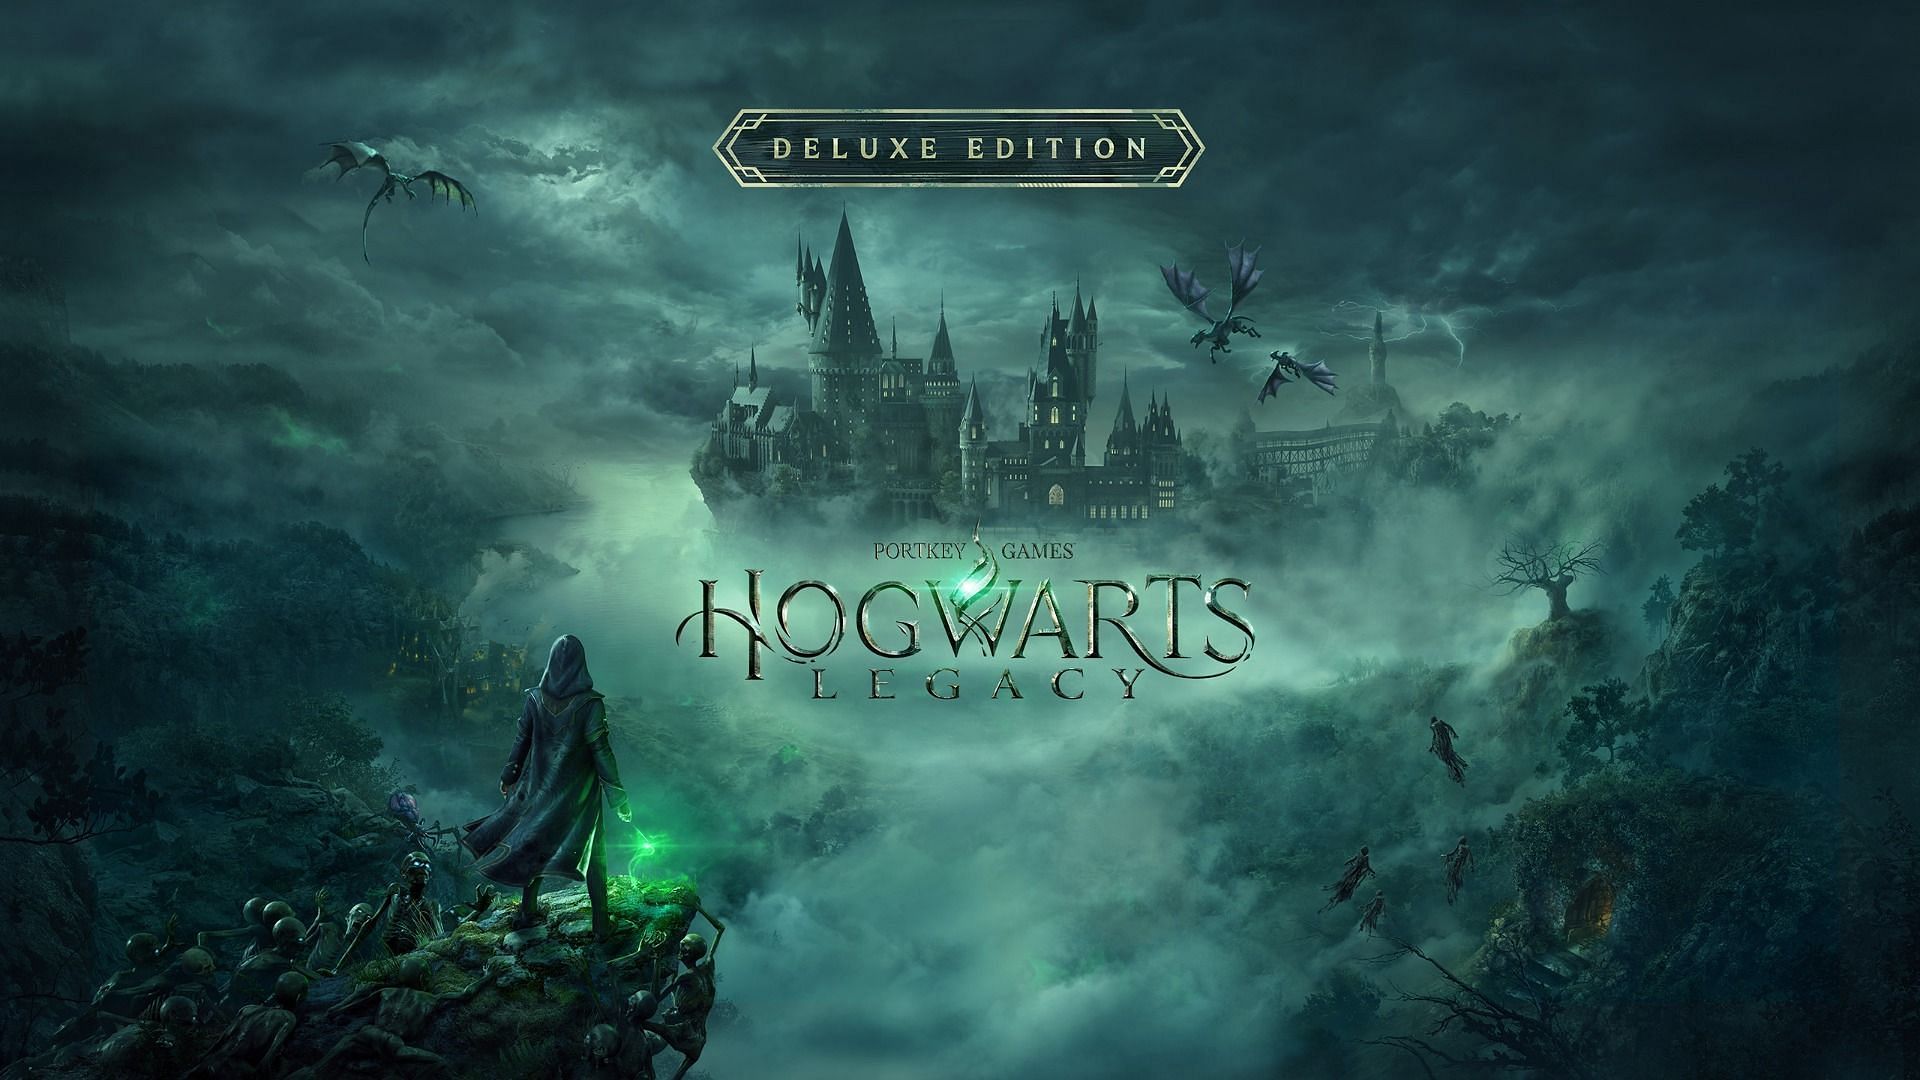 Will Hogwarts Legacy Release On Both Steam & Epic Games Store?